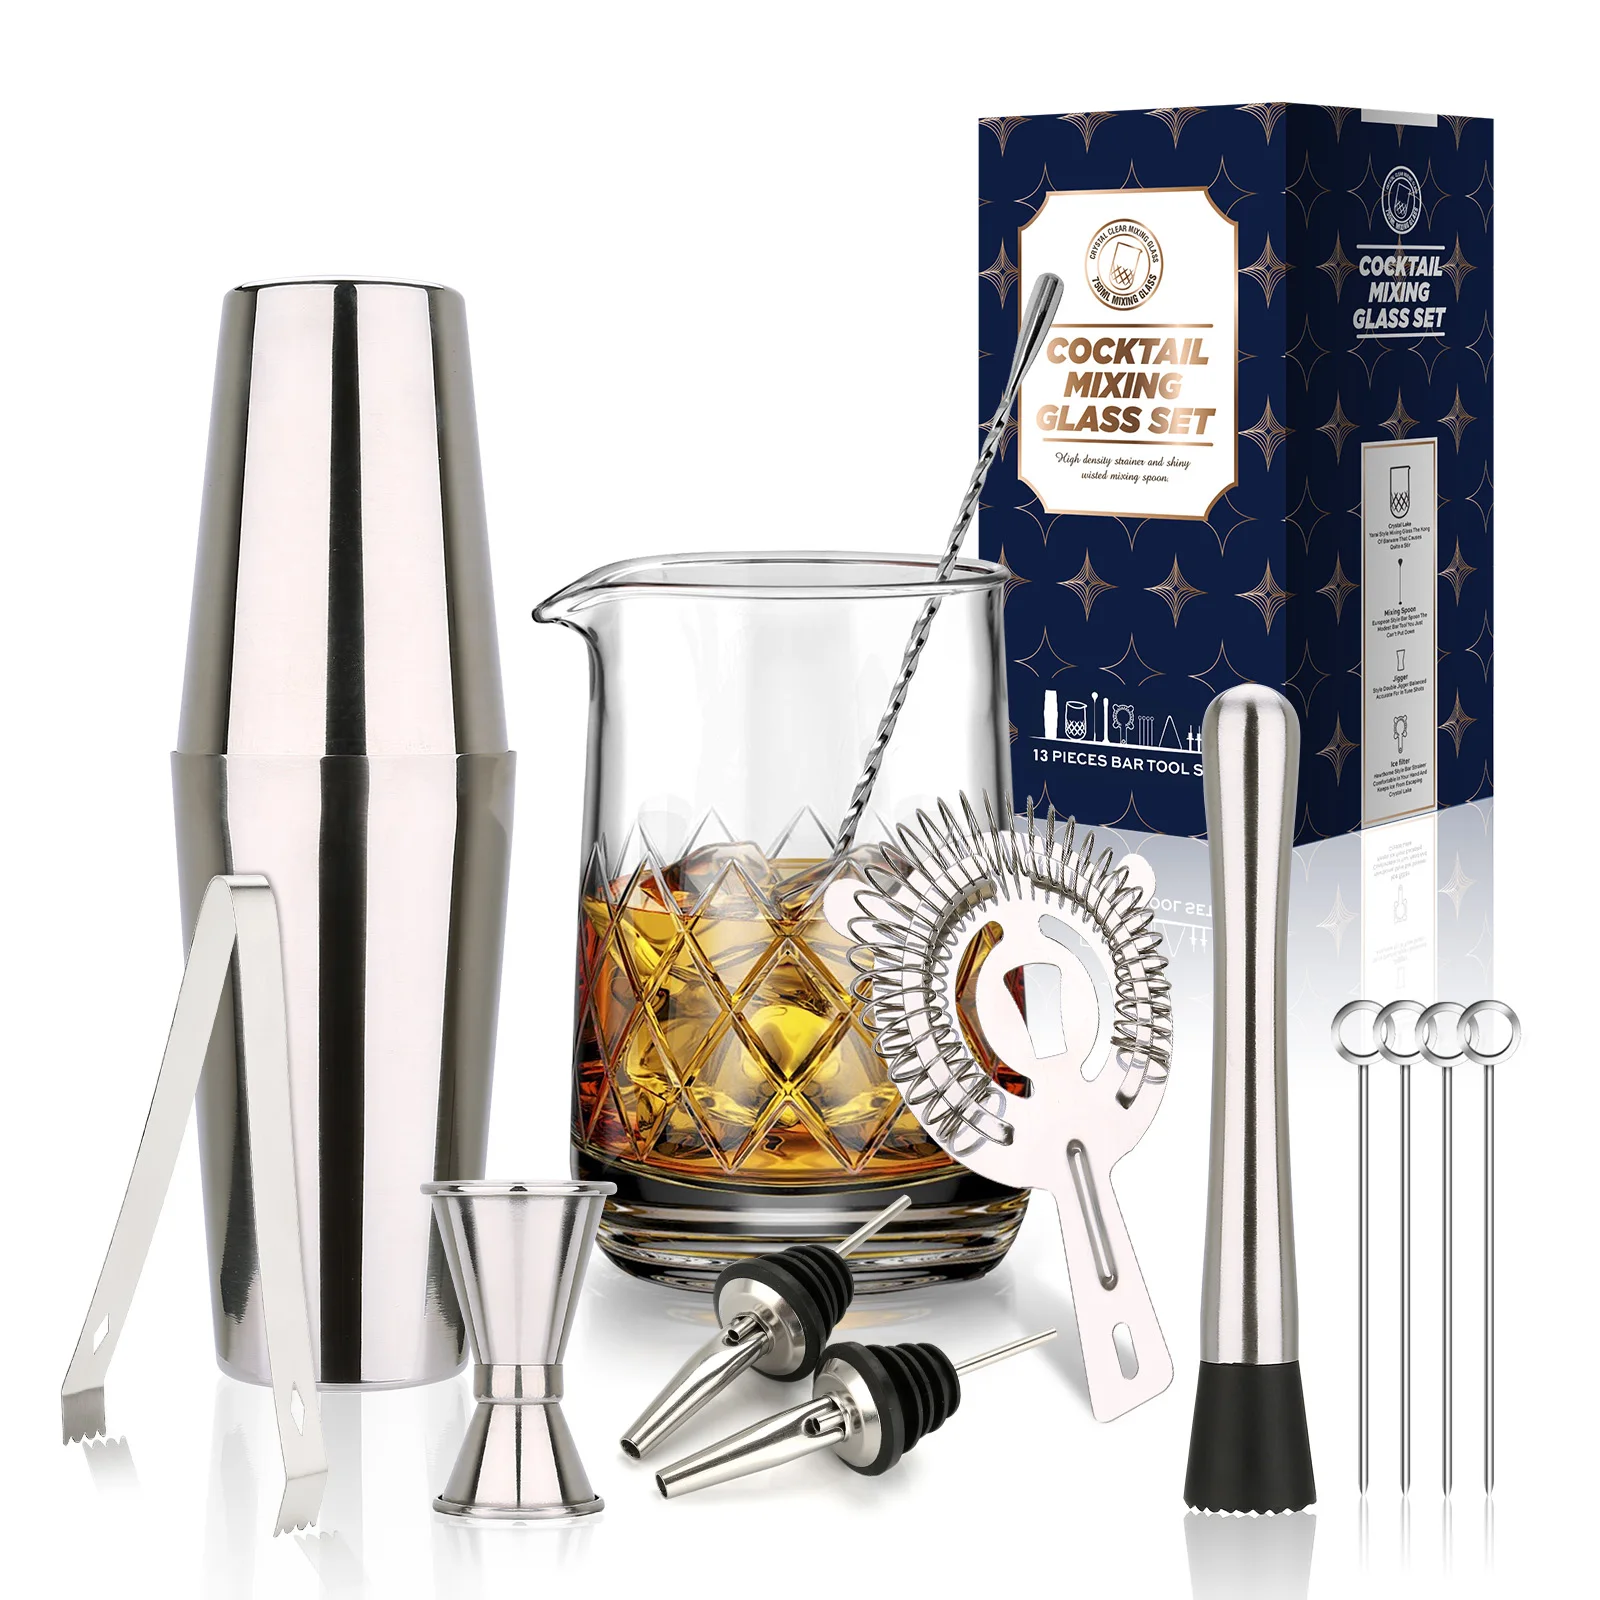 

750ml Crystal Cocktail Mixing Glass Set - 13 Psc Bartender Kit For Home Bar Party Makes A Great Gift